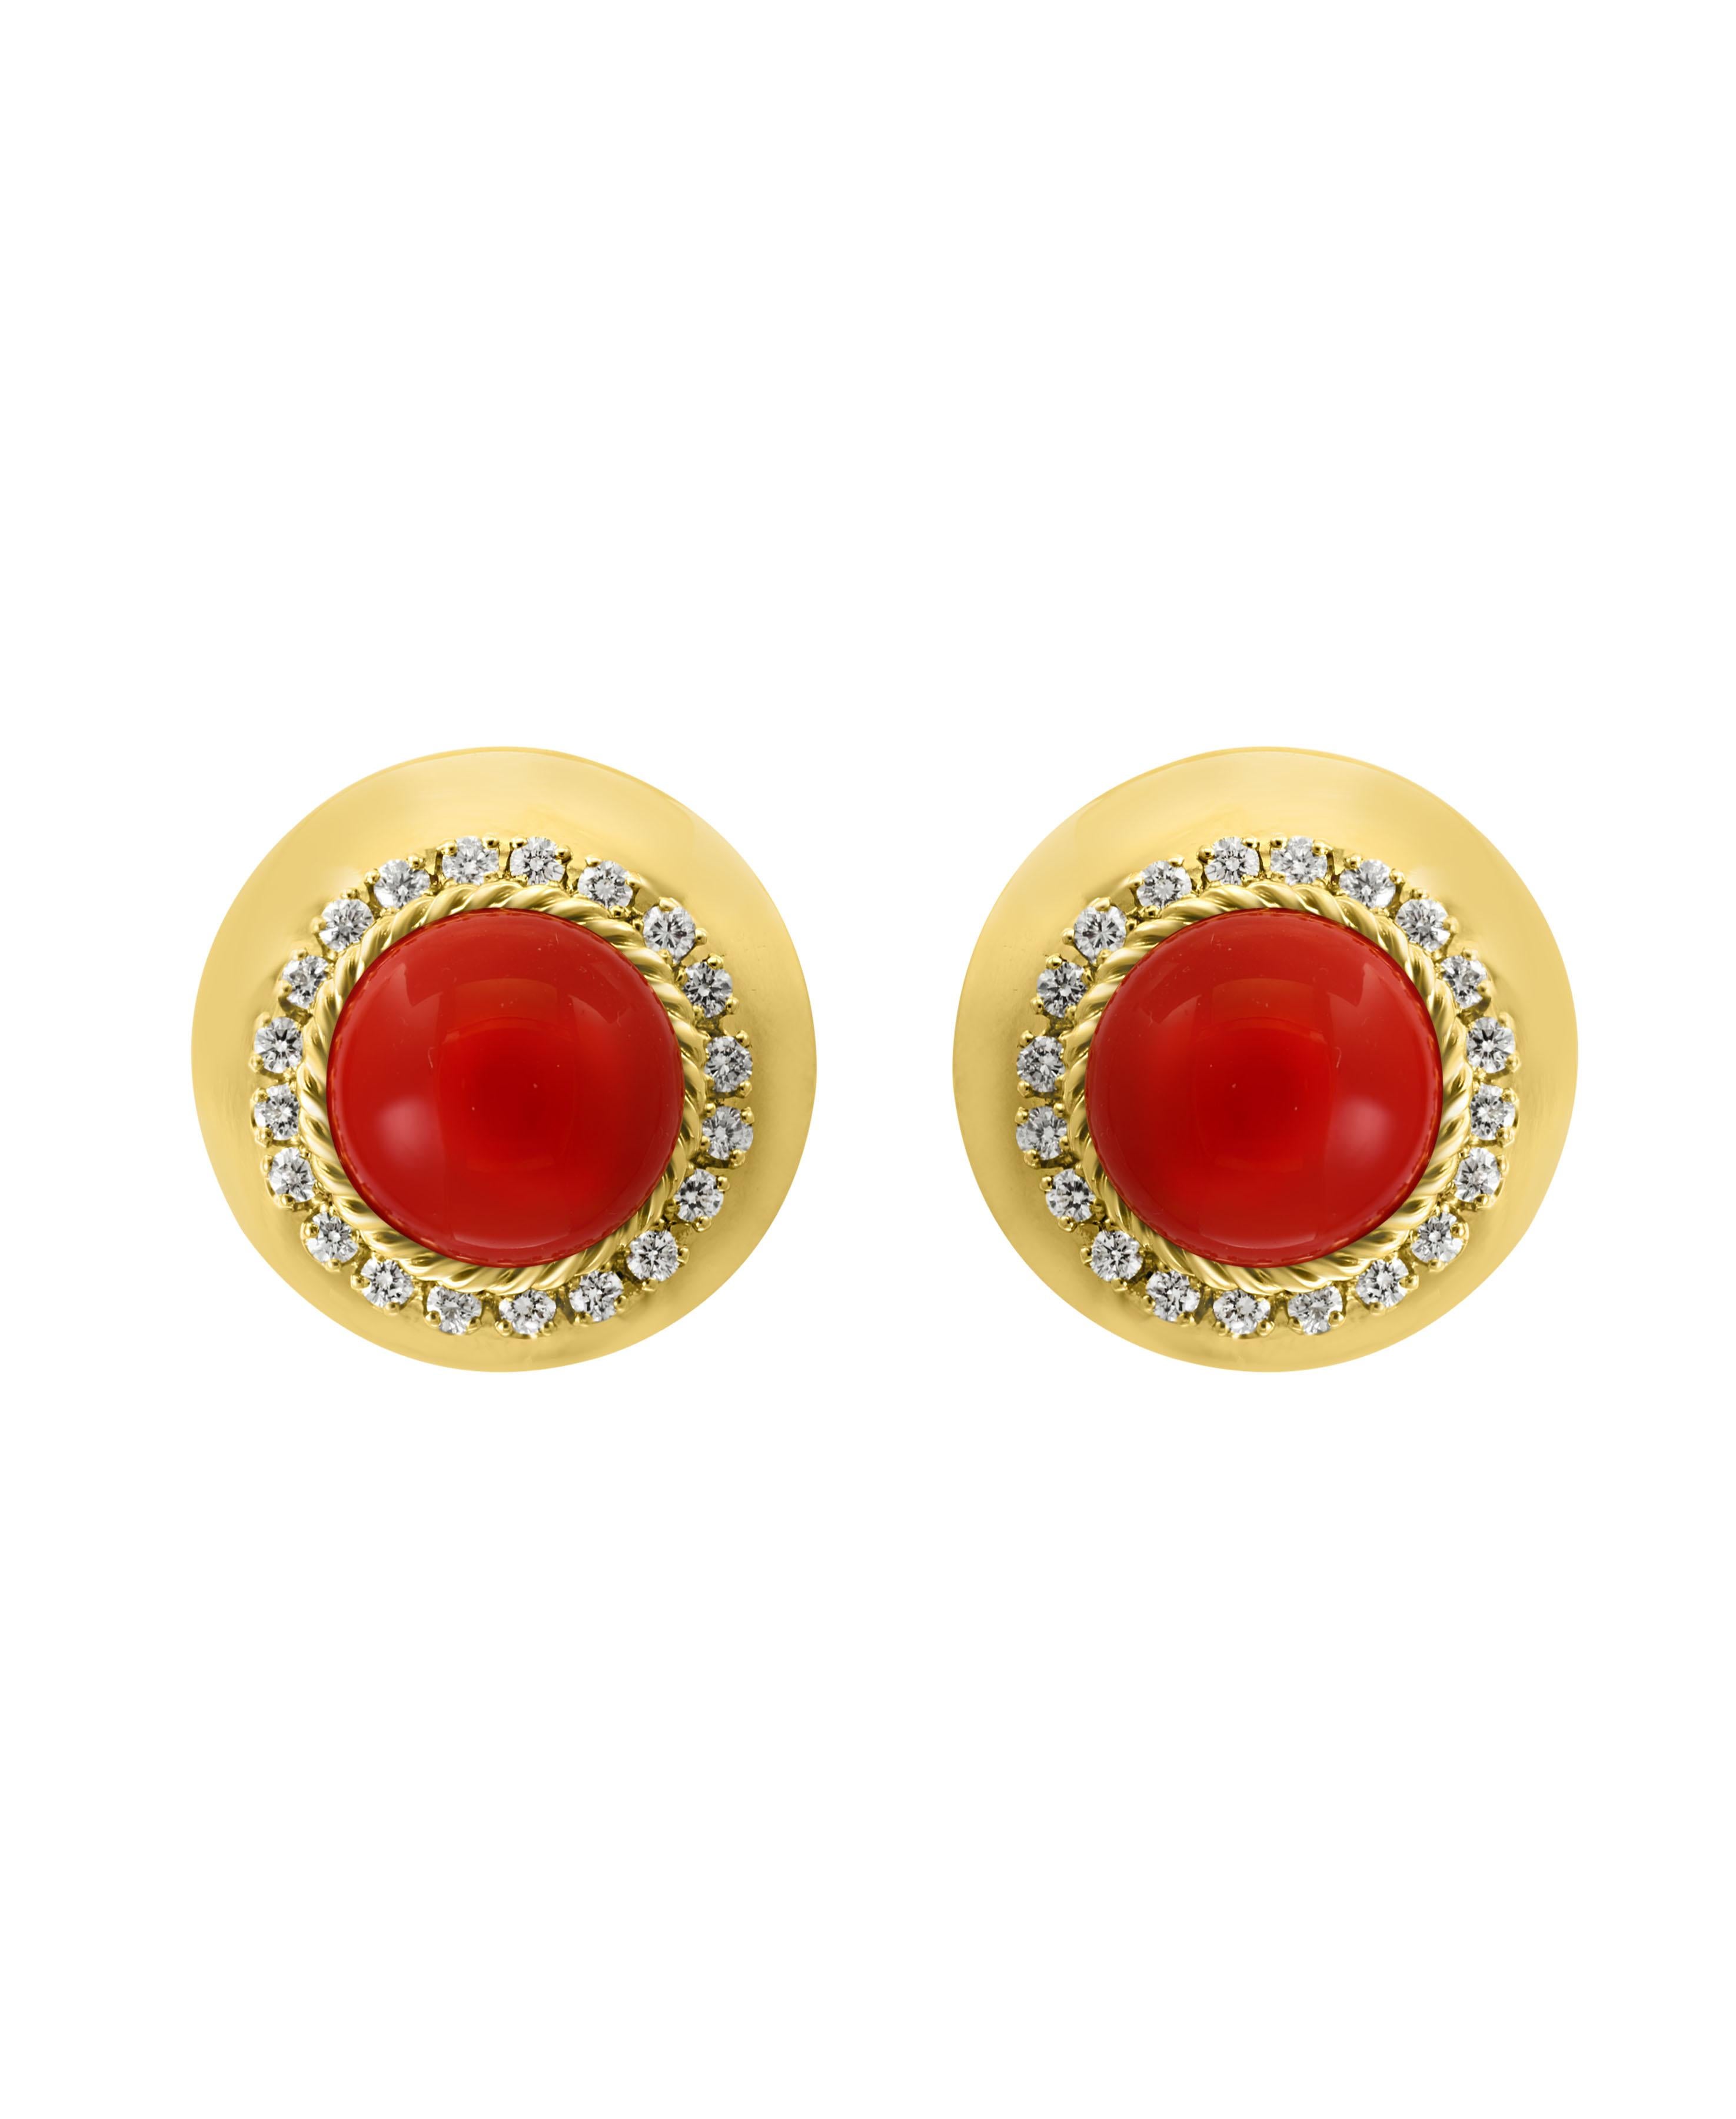 Designer Aletto Black Natural Cabochon Coral and Diamond Cocktail Earring in 18 Karat Yellow Gold
Coral Natural , Very Red/Tomato color , Very desirable color and quality.
perfect pair made in 18 Karat yellow gold. Natural coral of this size are